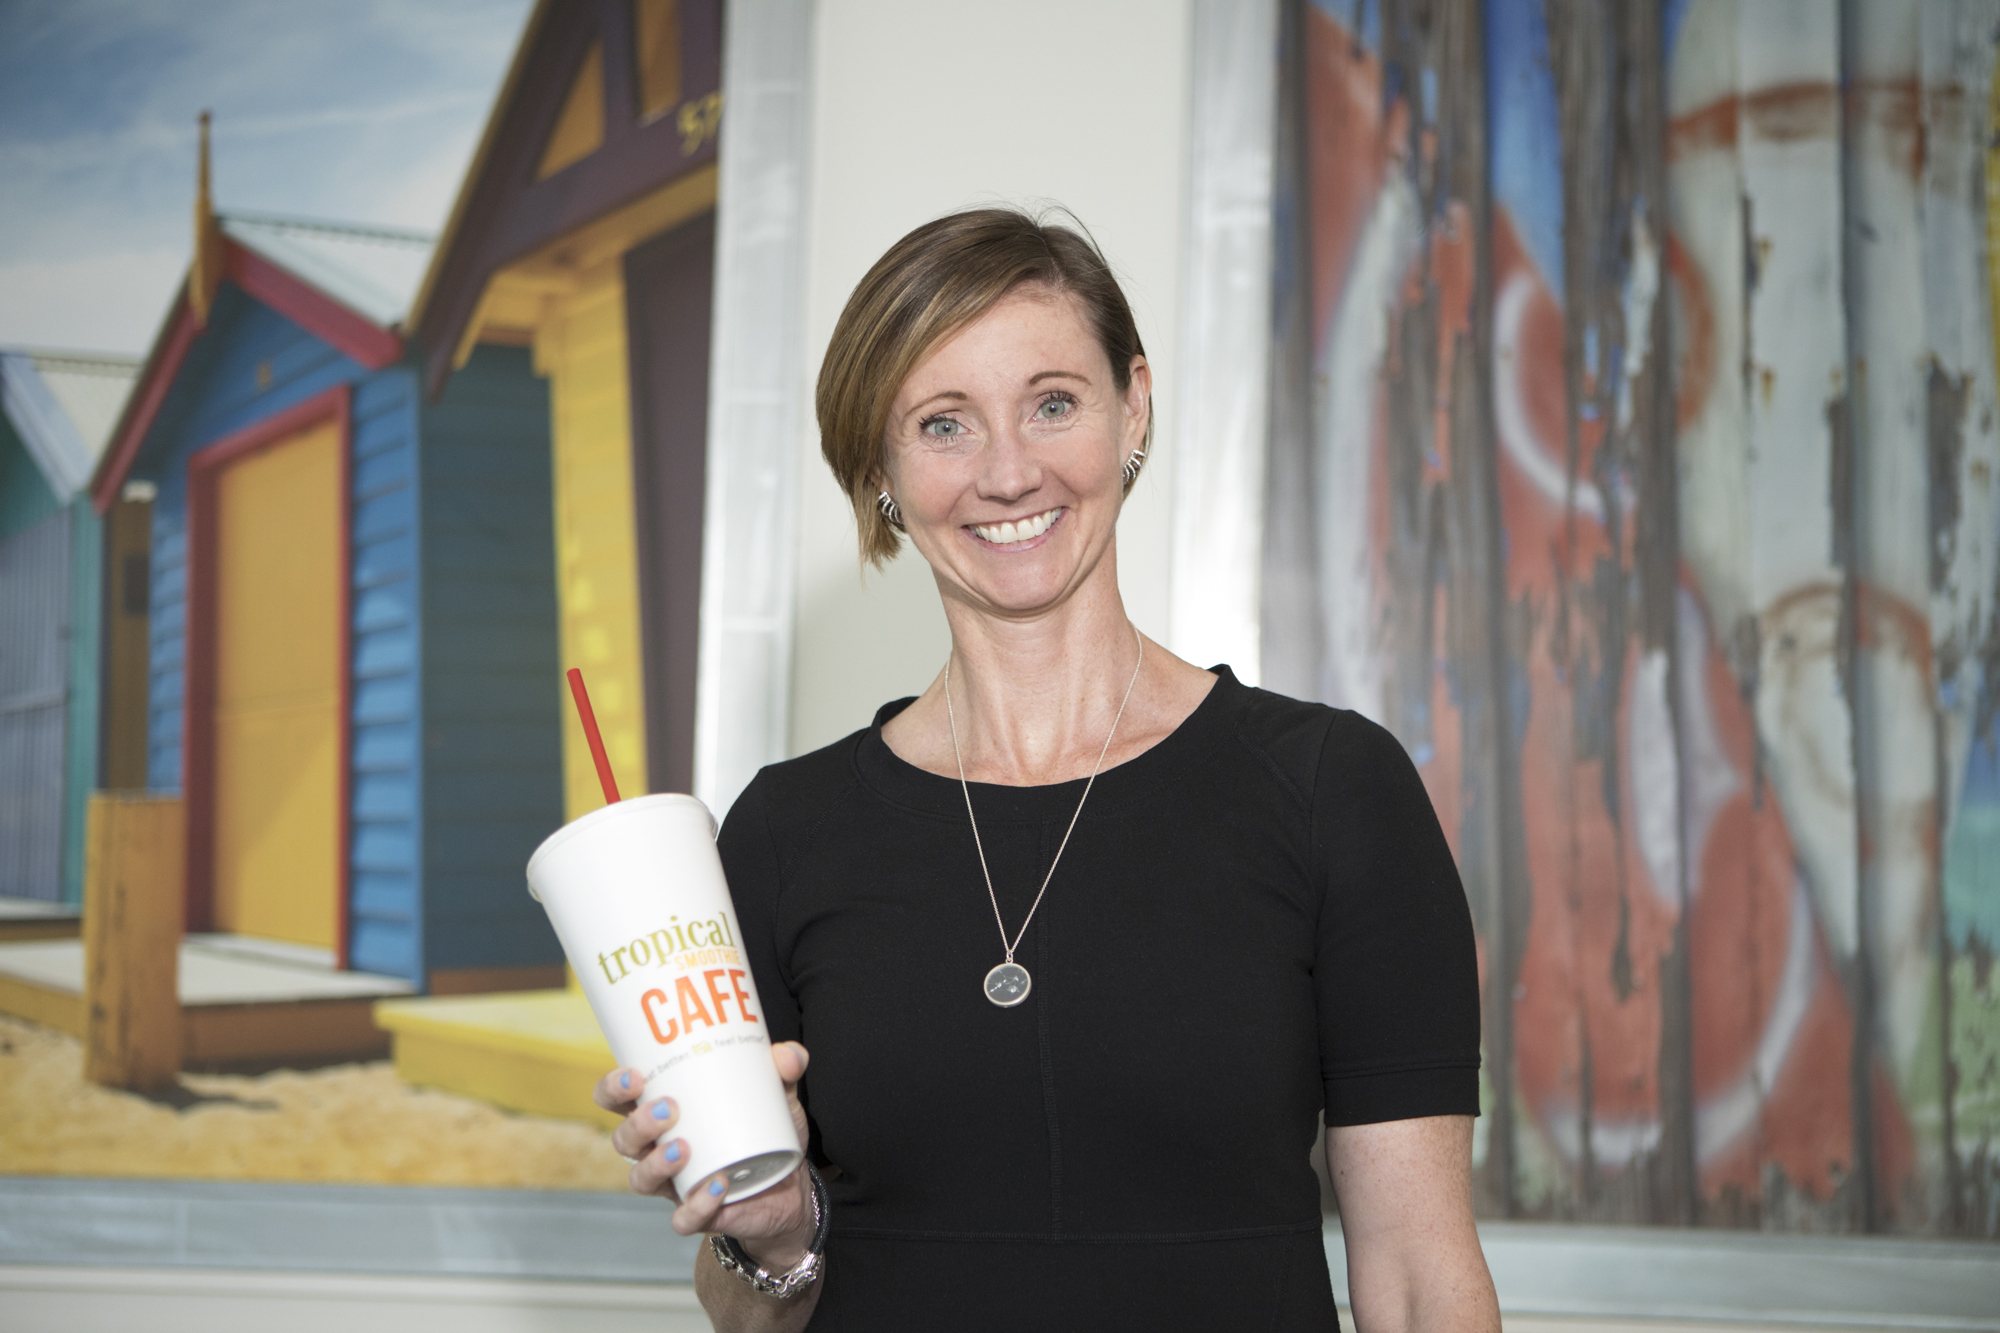 Mark Wemple. Emily Harrington became a Tropical Smoothie Cafe franchisee in 2016 after selling her interests in the Hardee's system.